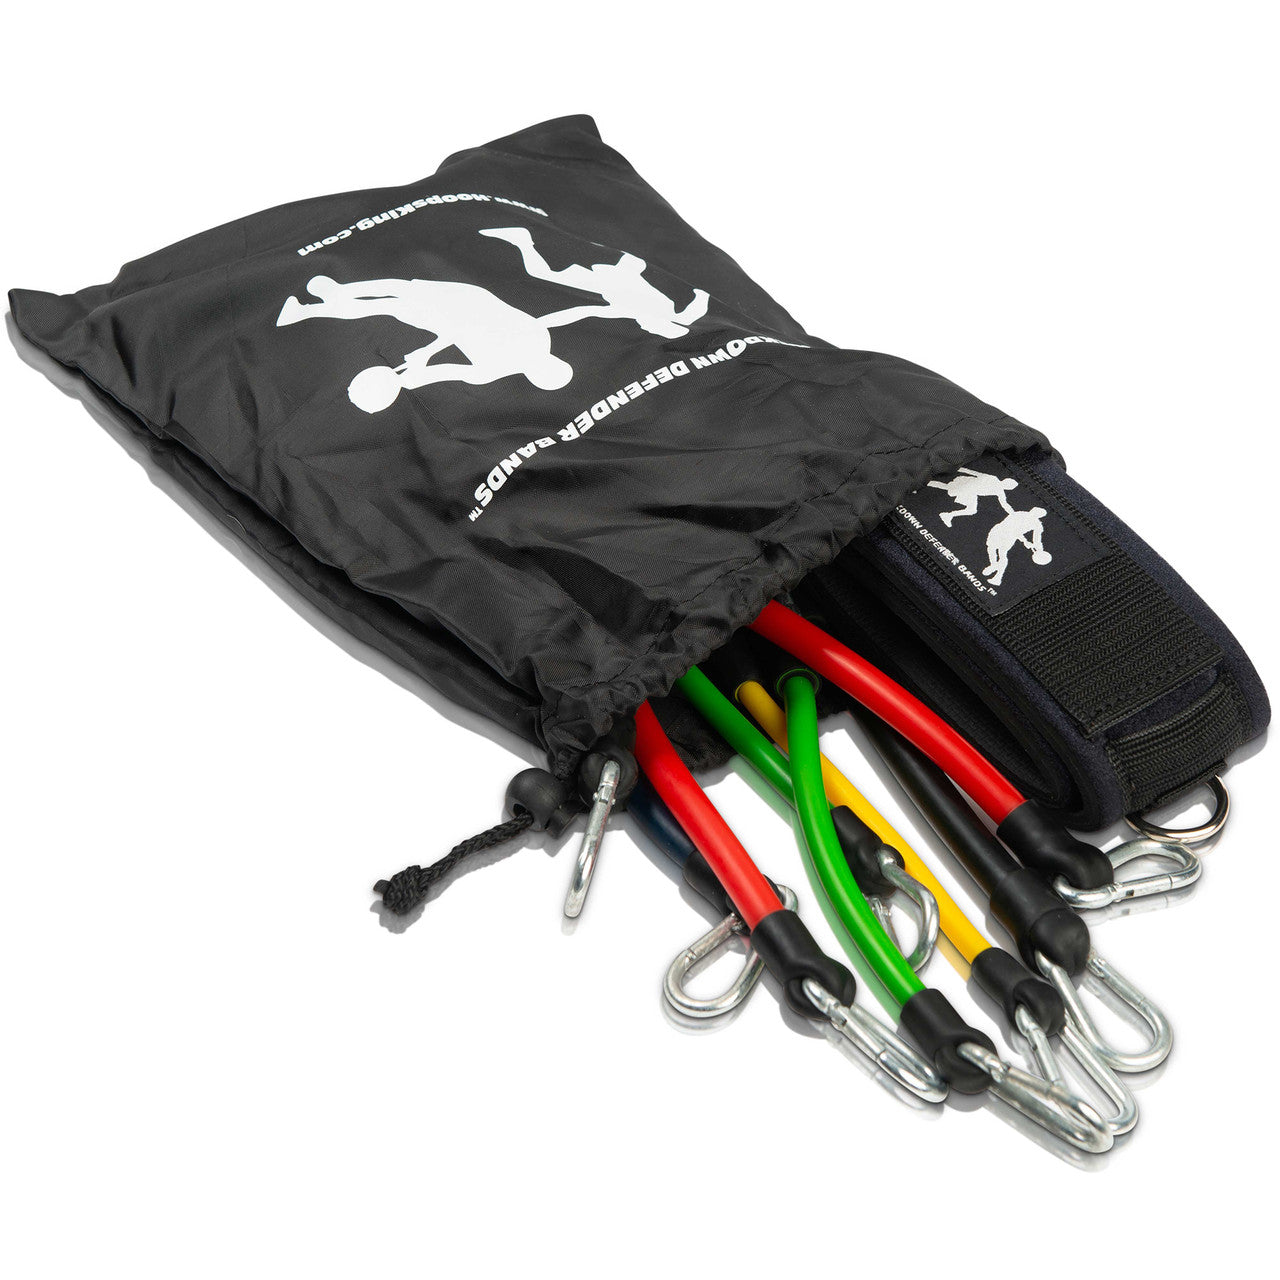 You will get 2 straps and 5 pairs of resistance bands.